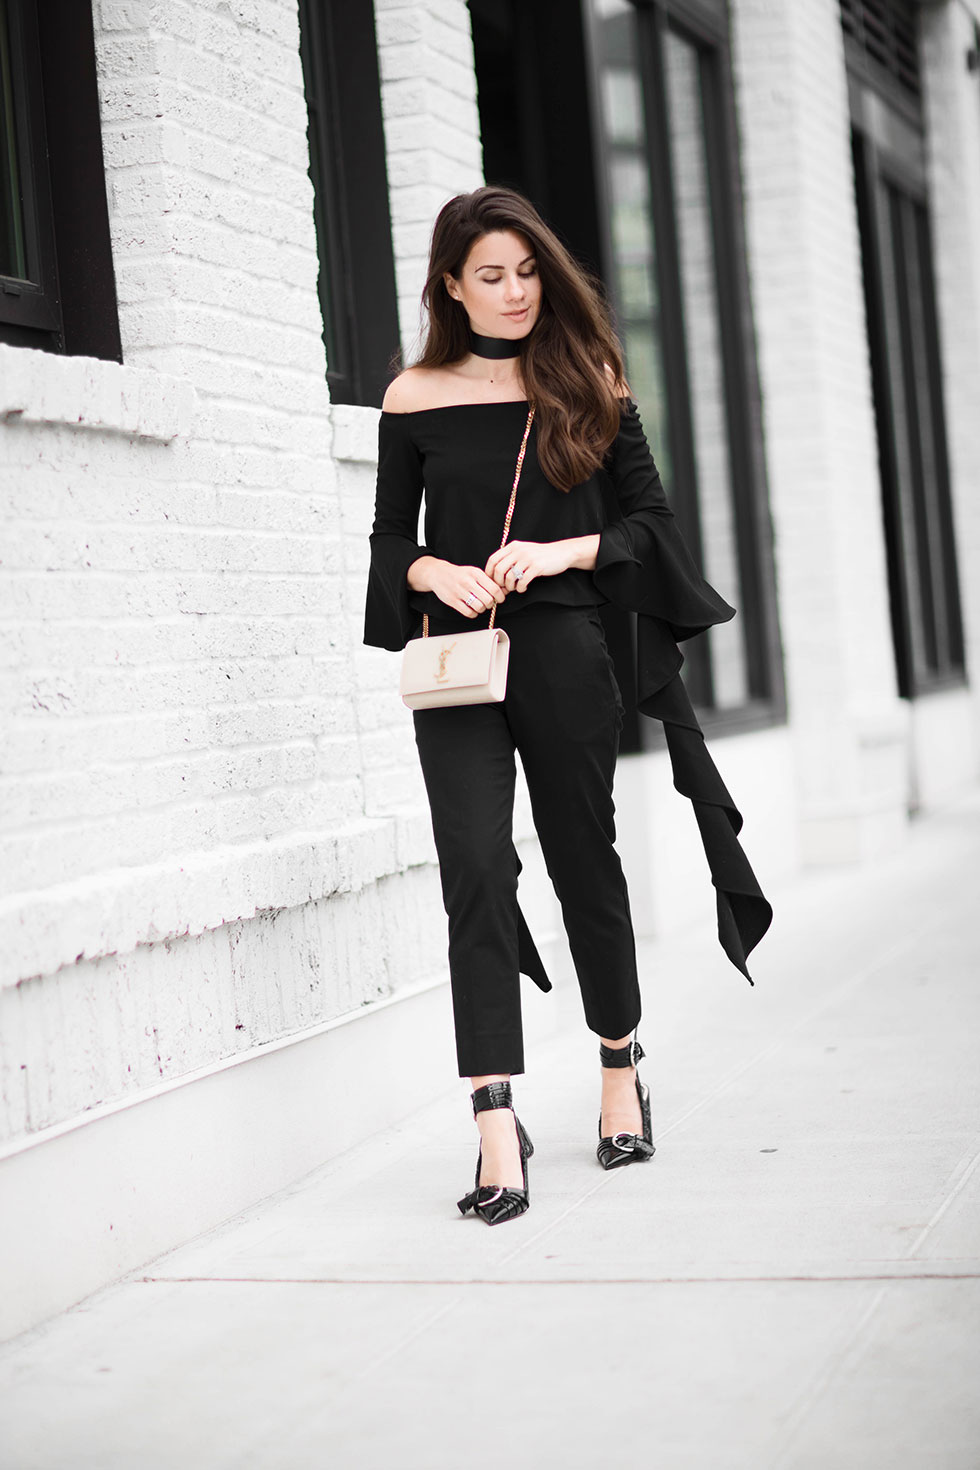 Your Not-So-Basic Guide to Rocking an Off-The-Shoulder Top - ELLERY RUFFLE SLEEVE OFF-SHOULDER TOP, Dior Black patent calfskin slingback pump Line from the Summer 2016 catwalk show, All Black Outfit